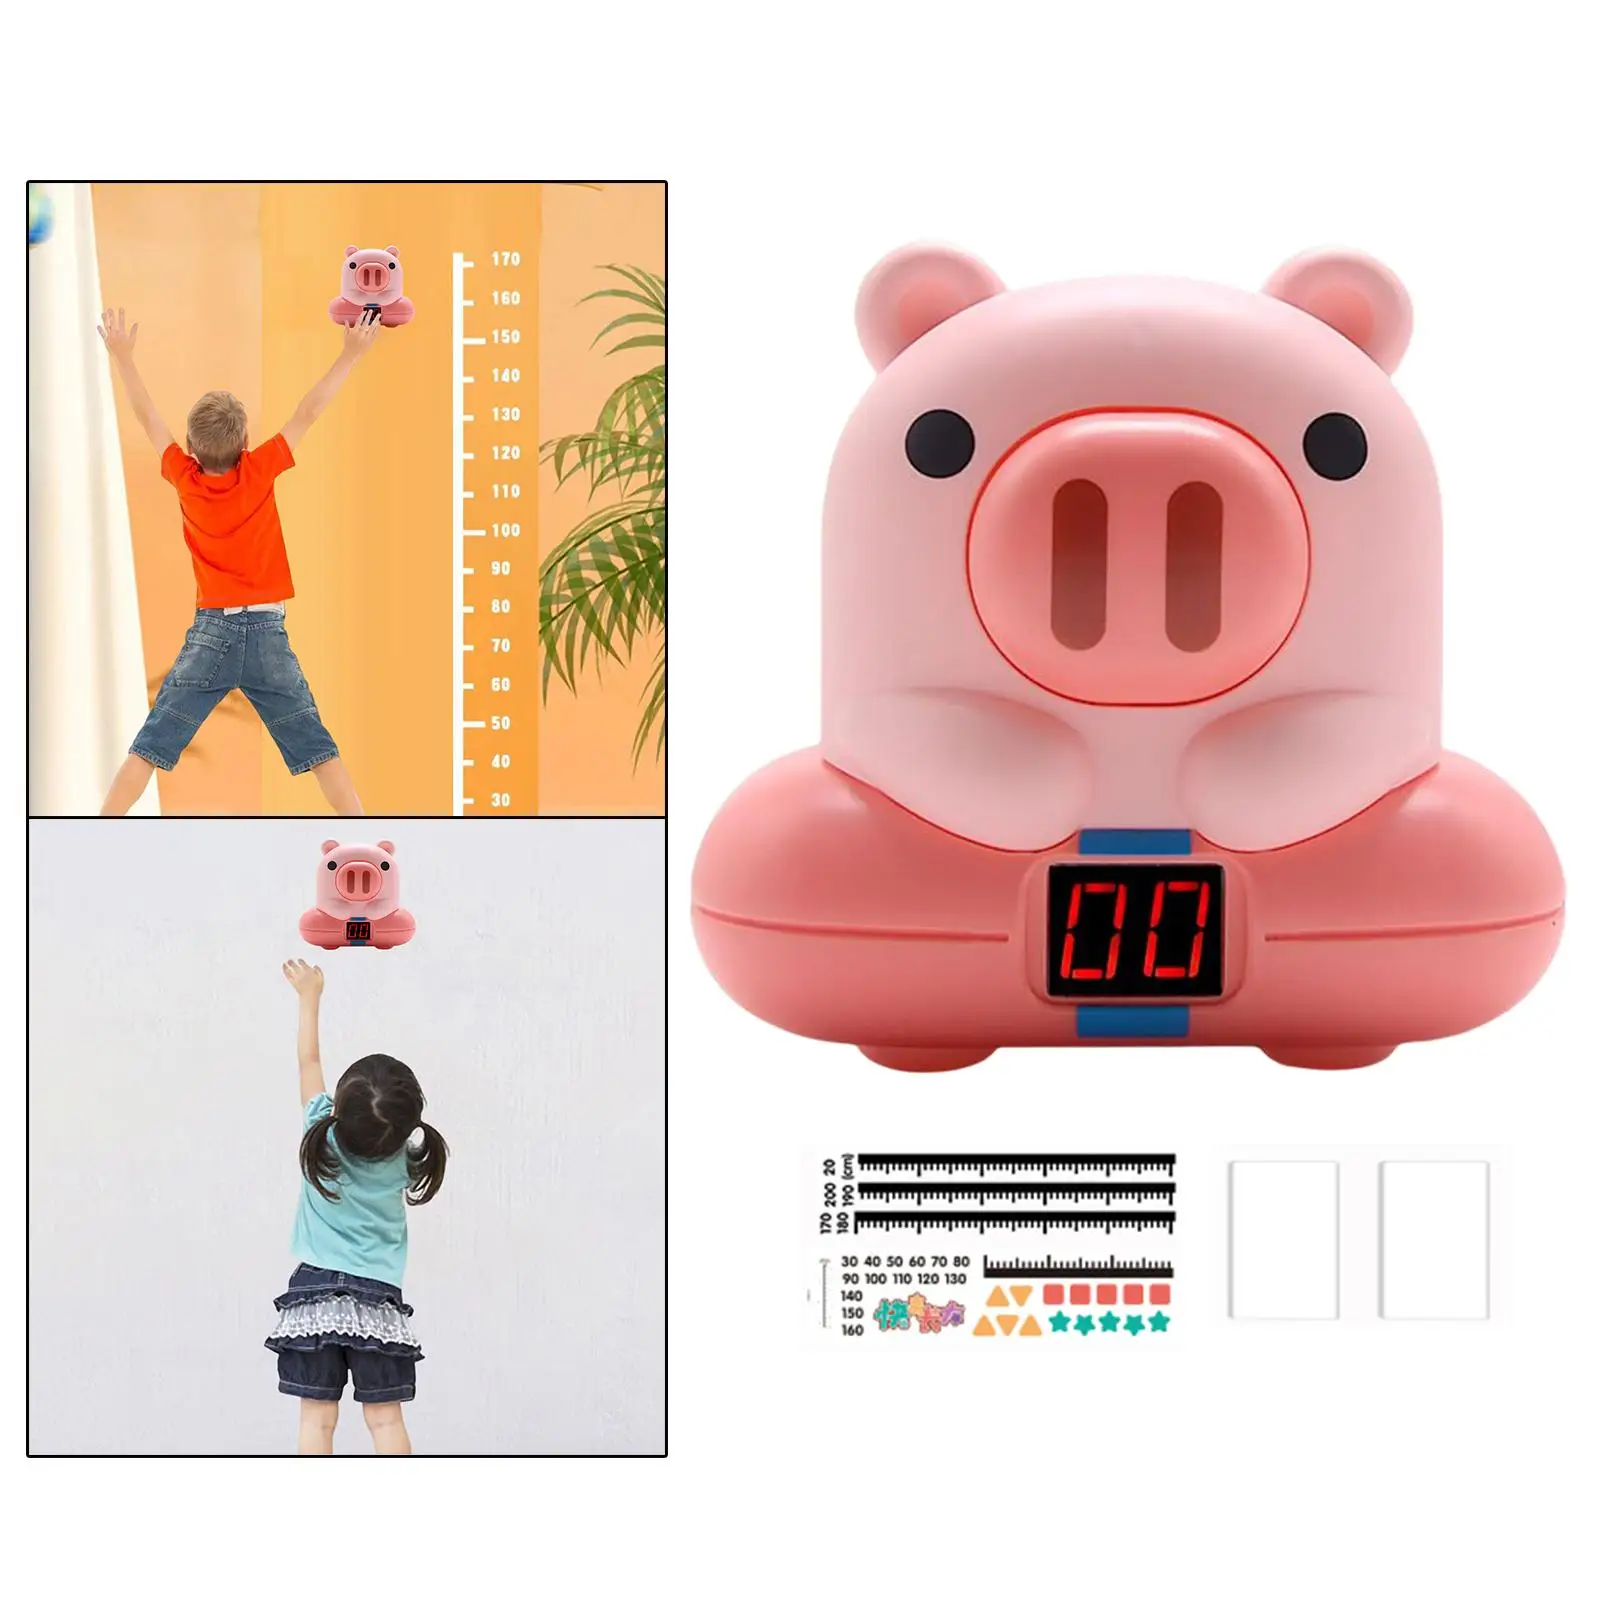 Wall Mounted Touch Jump Toy Accessories Counting Training Equipment Baby Slaps Toys Kids for Children Sports Parent Bedroom Home